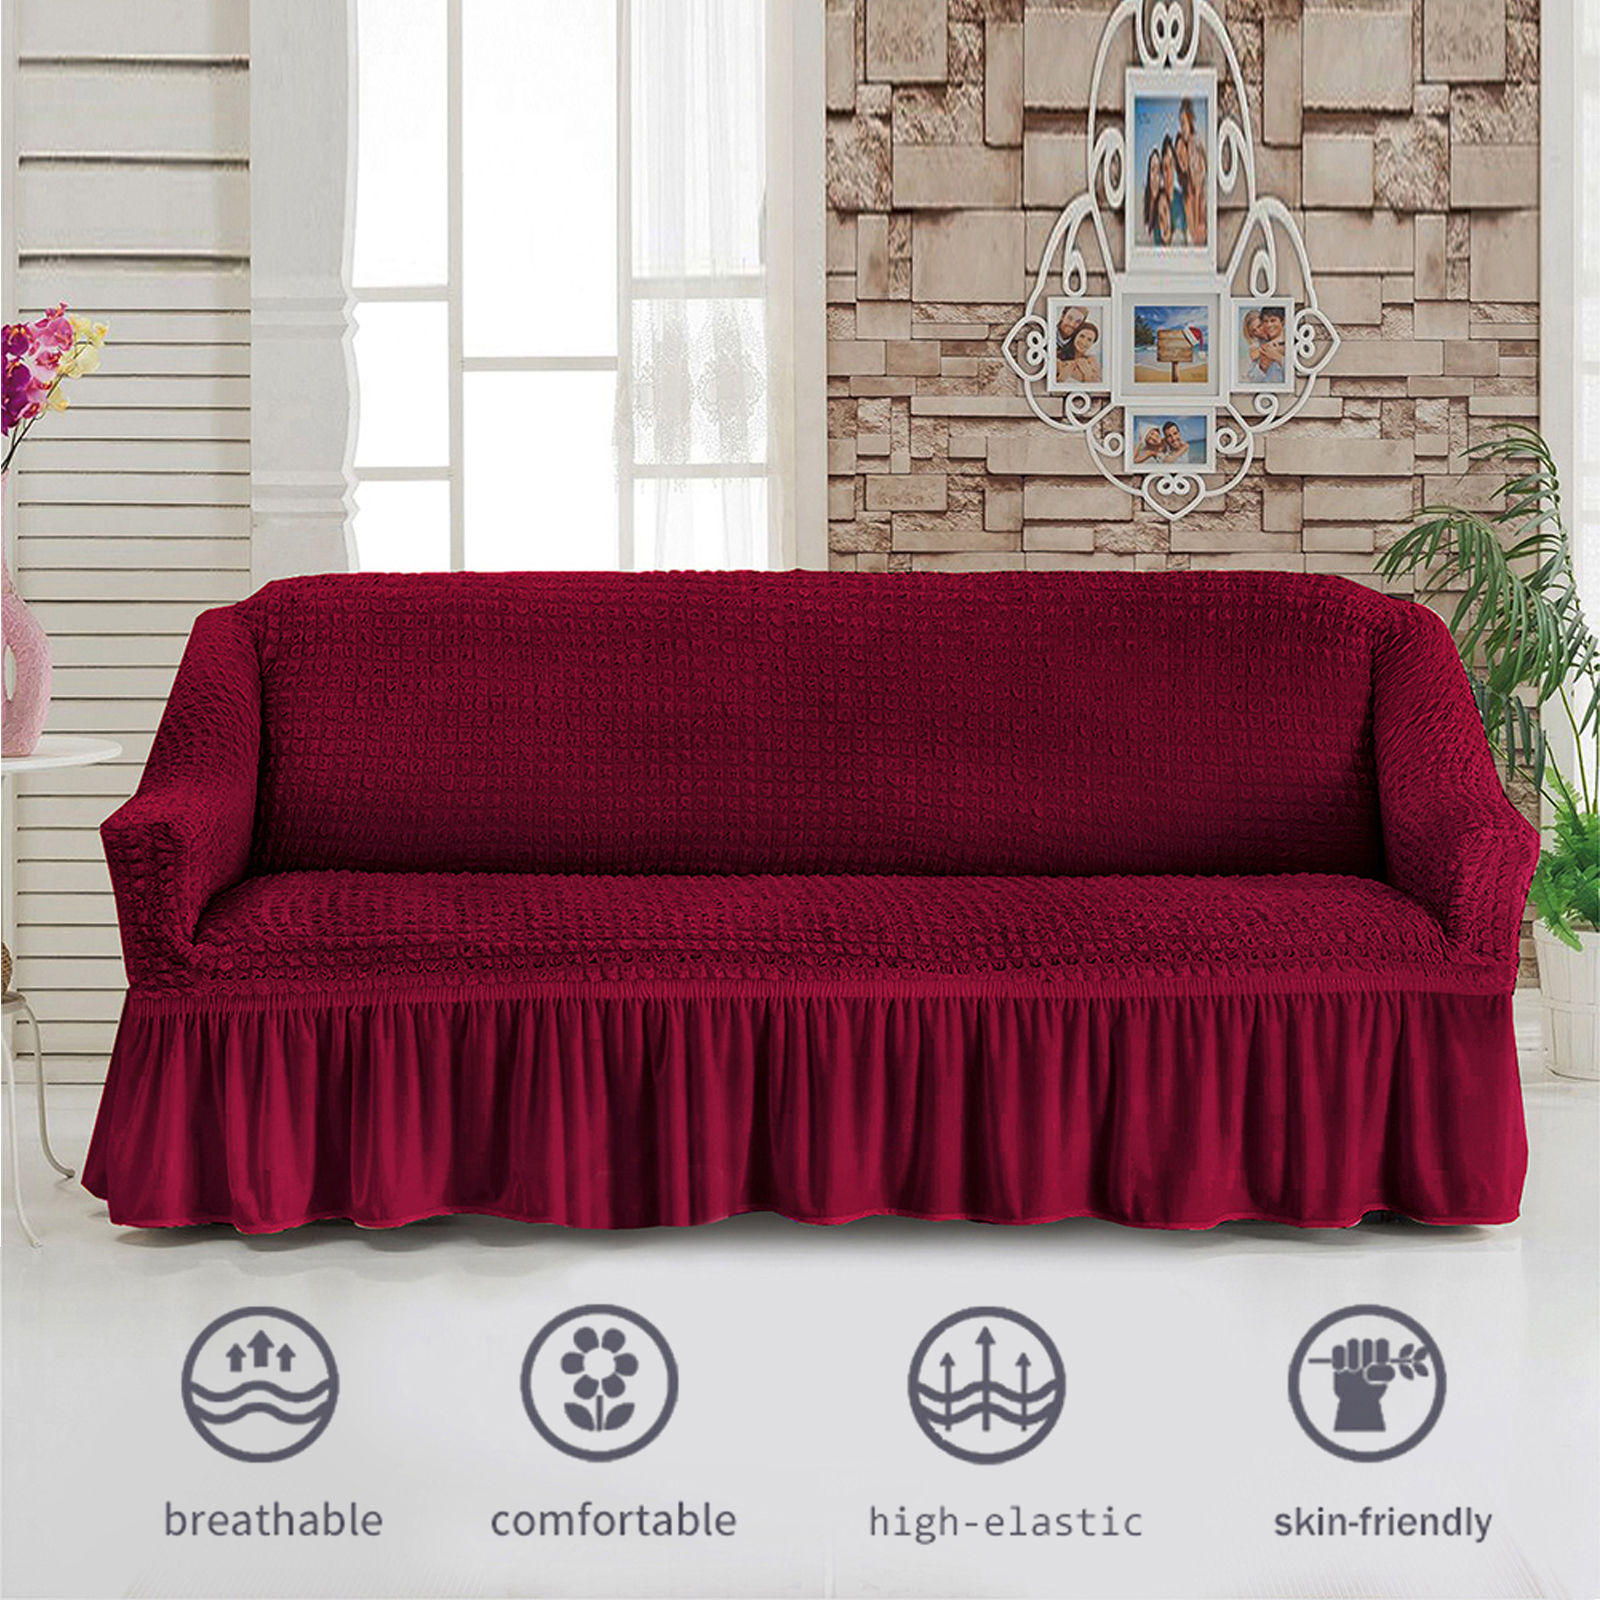 Stretch Sofa Slipcover, 3 Seater Sofa Slipcovers With Skirt With Armless Soft Sofa Cover Elastic Straps Sofa Slipcover For Living Room Kids Pets-red-Large